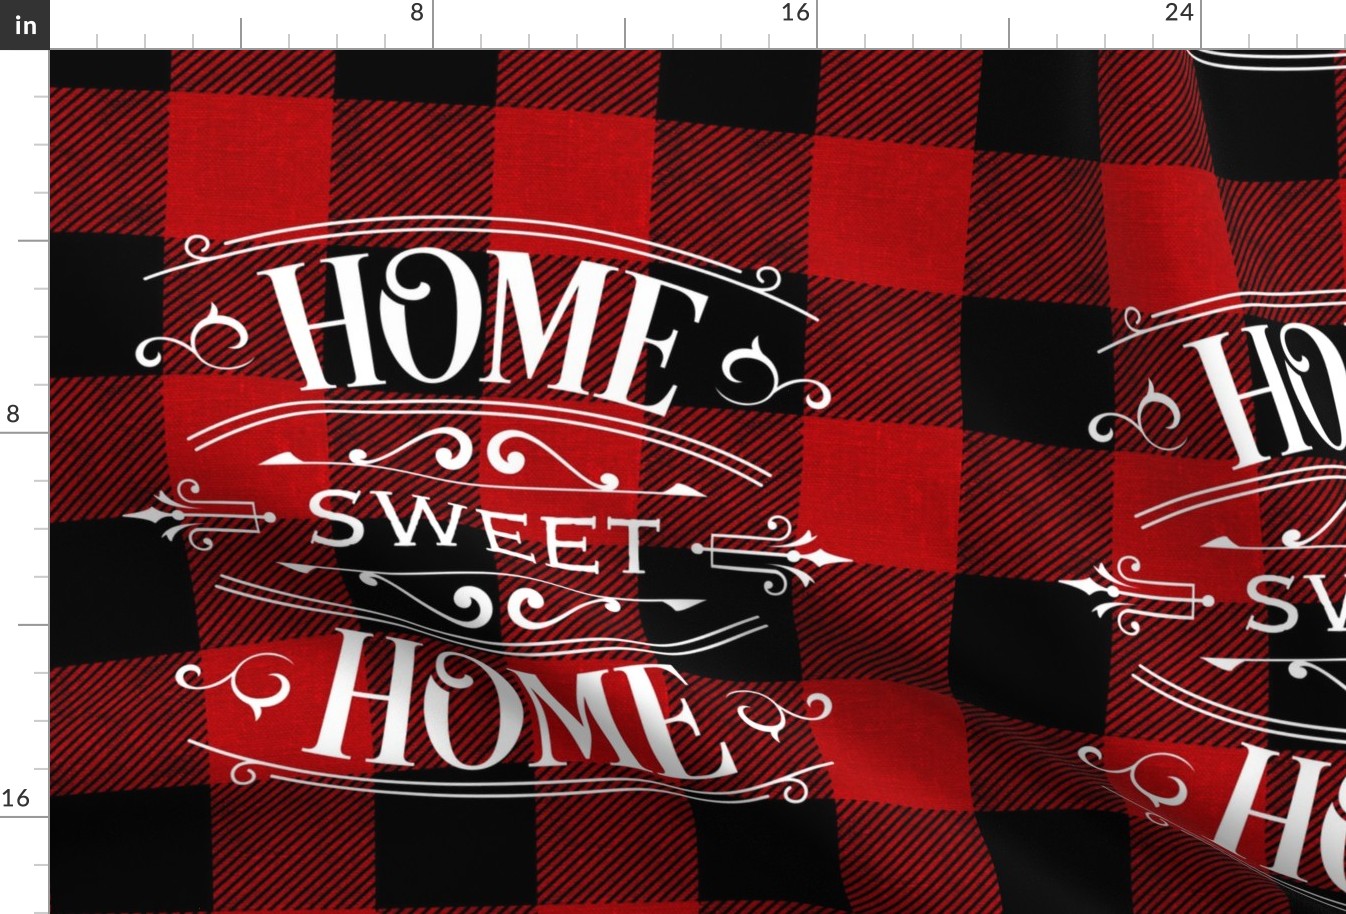 Home Sweet Home on Red Buffalo Plaid 18 inch square